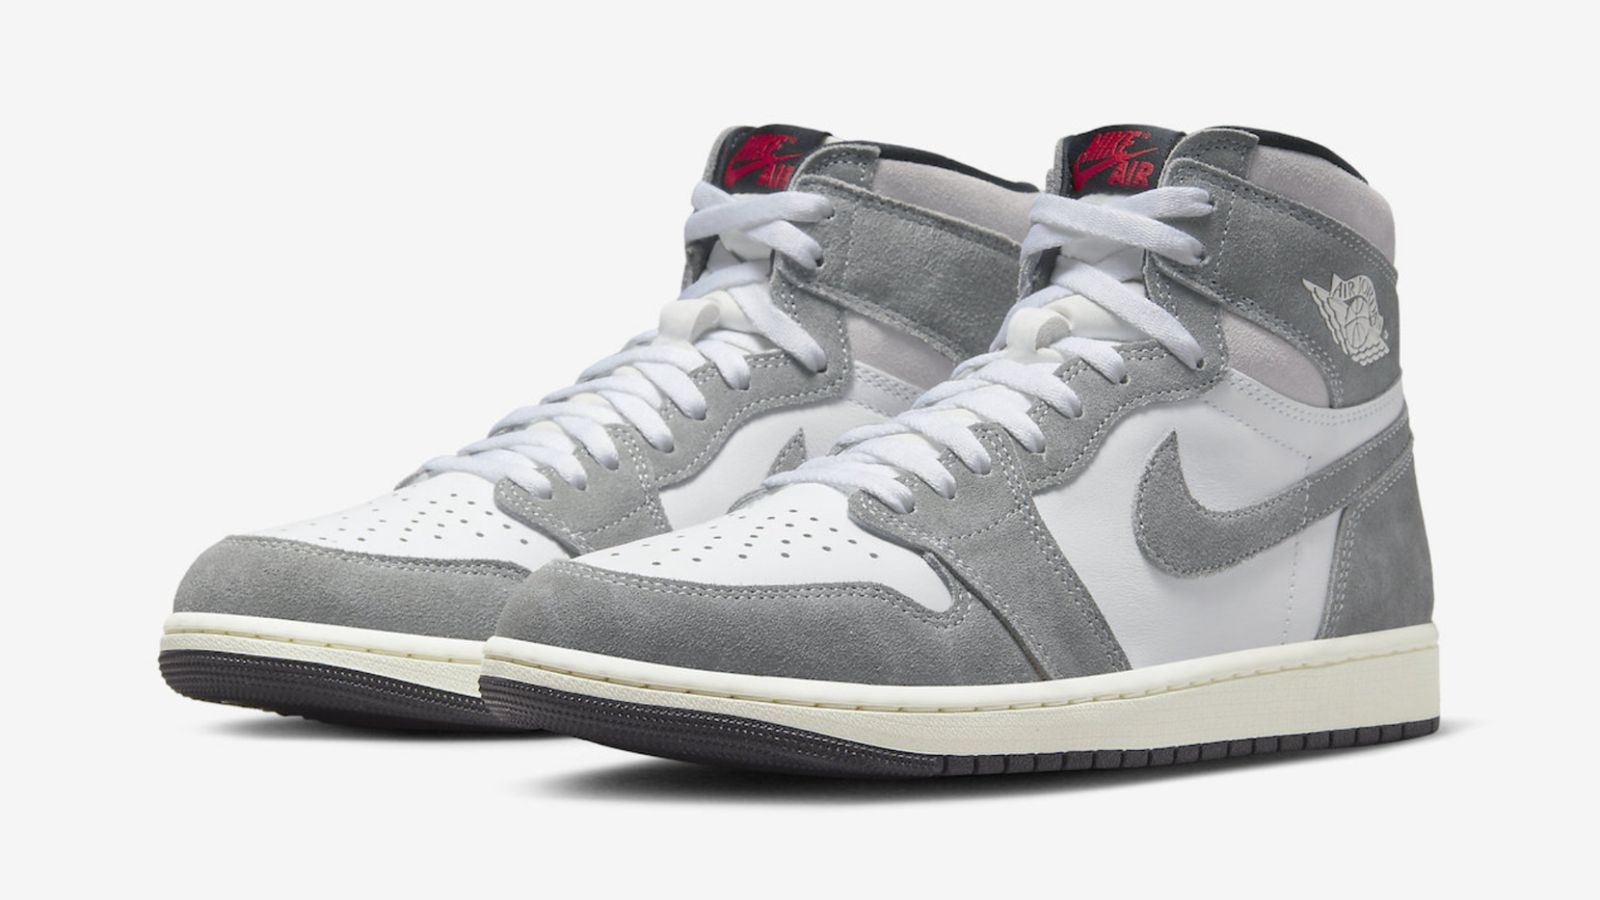 Air Jordan 1 High "Washed Black" product image of a white leather and washed grey suede high-top featuring black details and red branding.